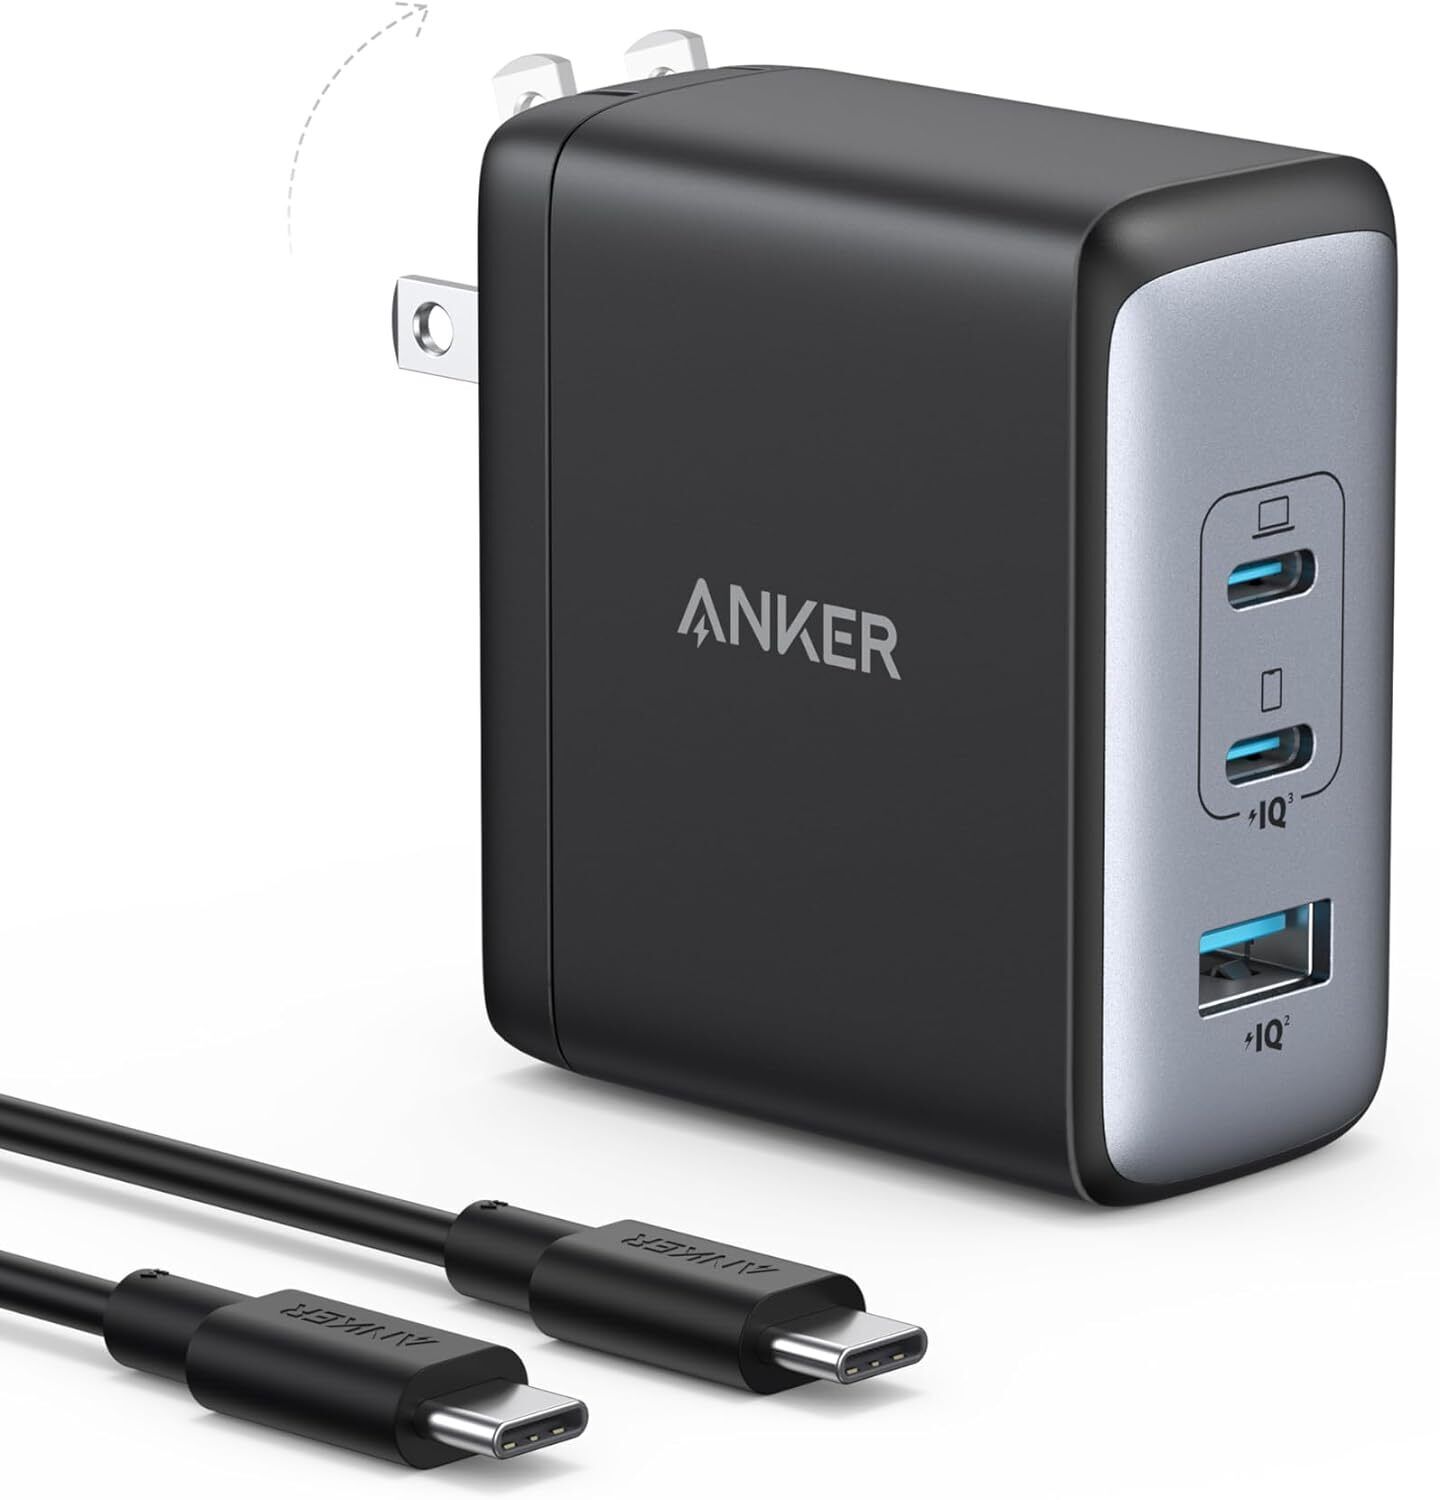 Anker Nano II 100W USB C Wall Charger 3-Port Adapter for MacBook/iPhone/Samsung